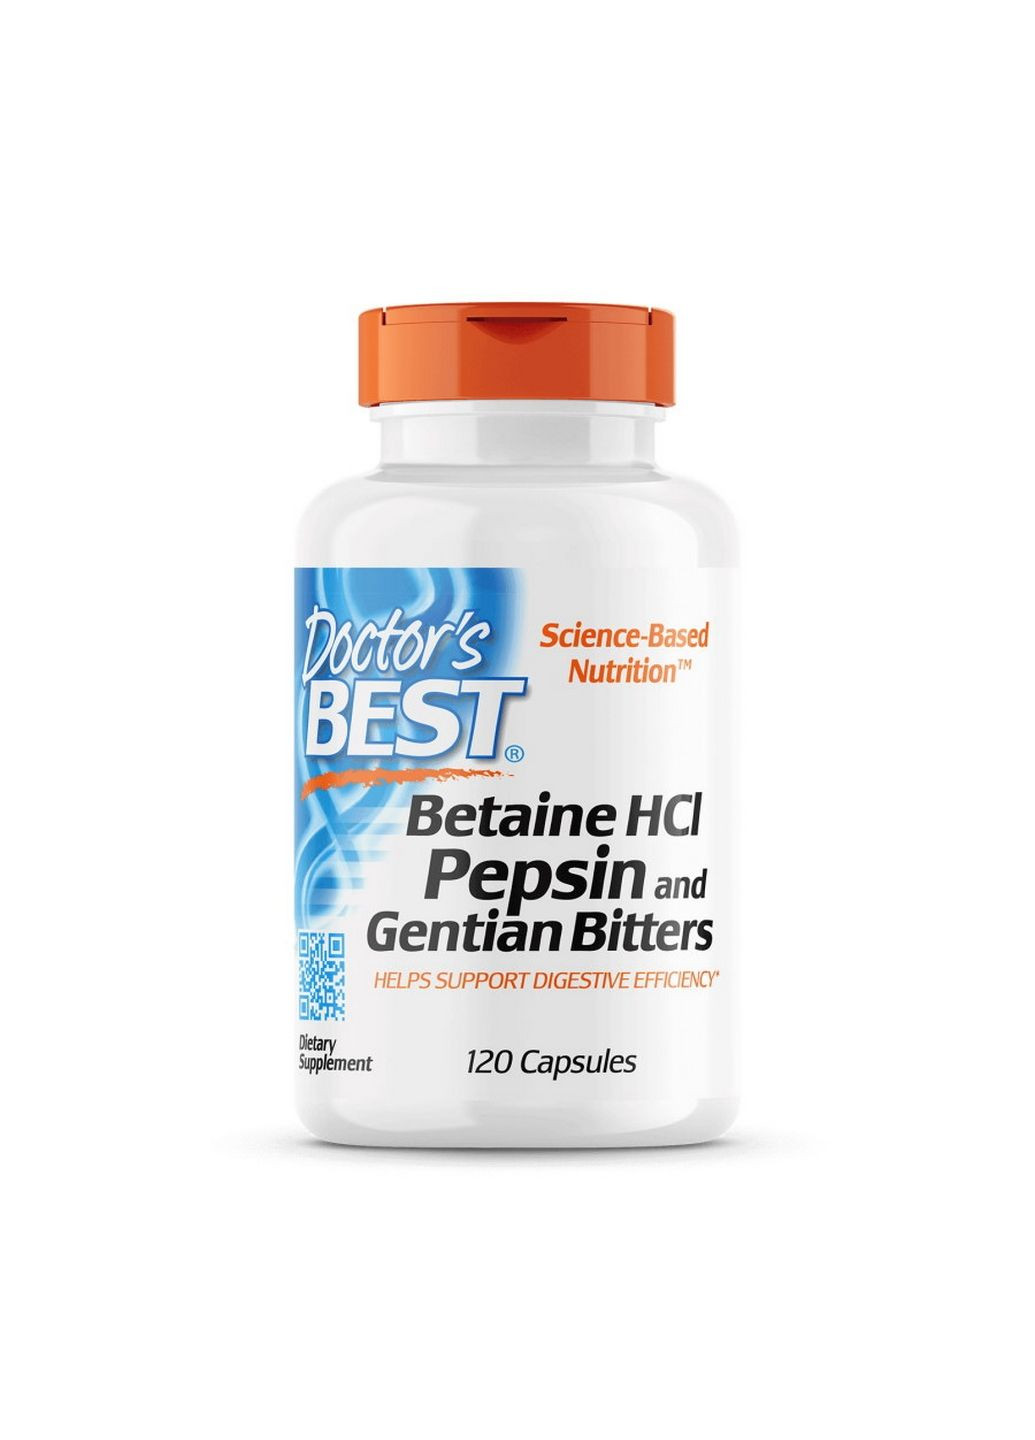 Натуральная добавка Betaine HCL Pepsin and Gentian Bitters, 120 капсул Doctor's Best (293337816)